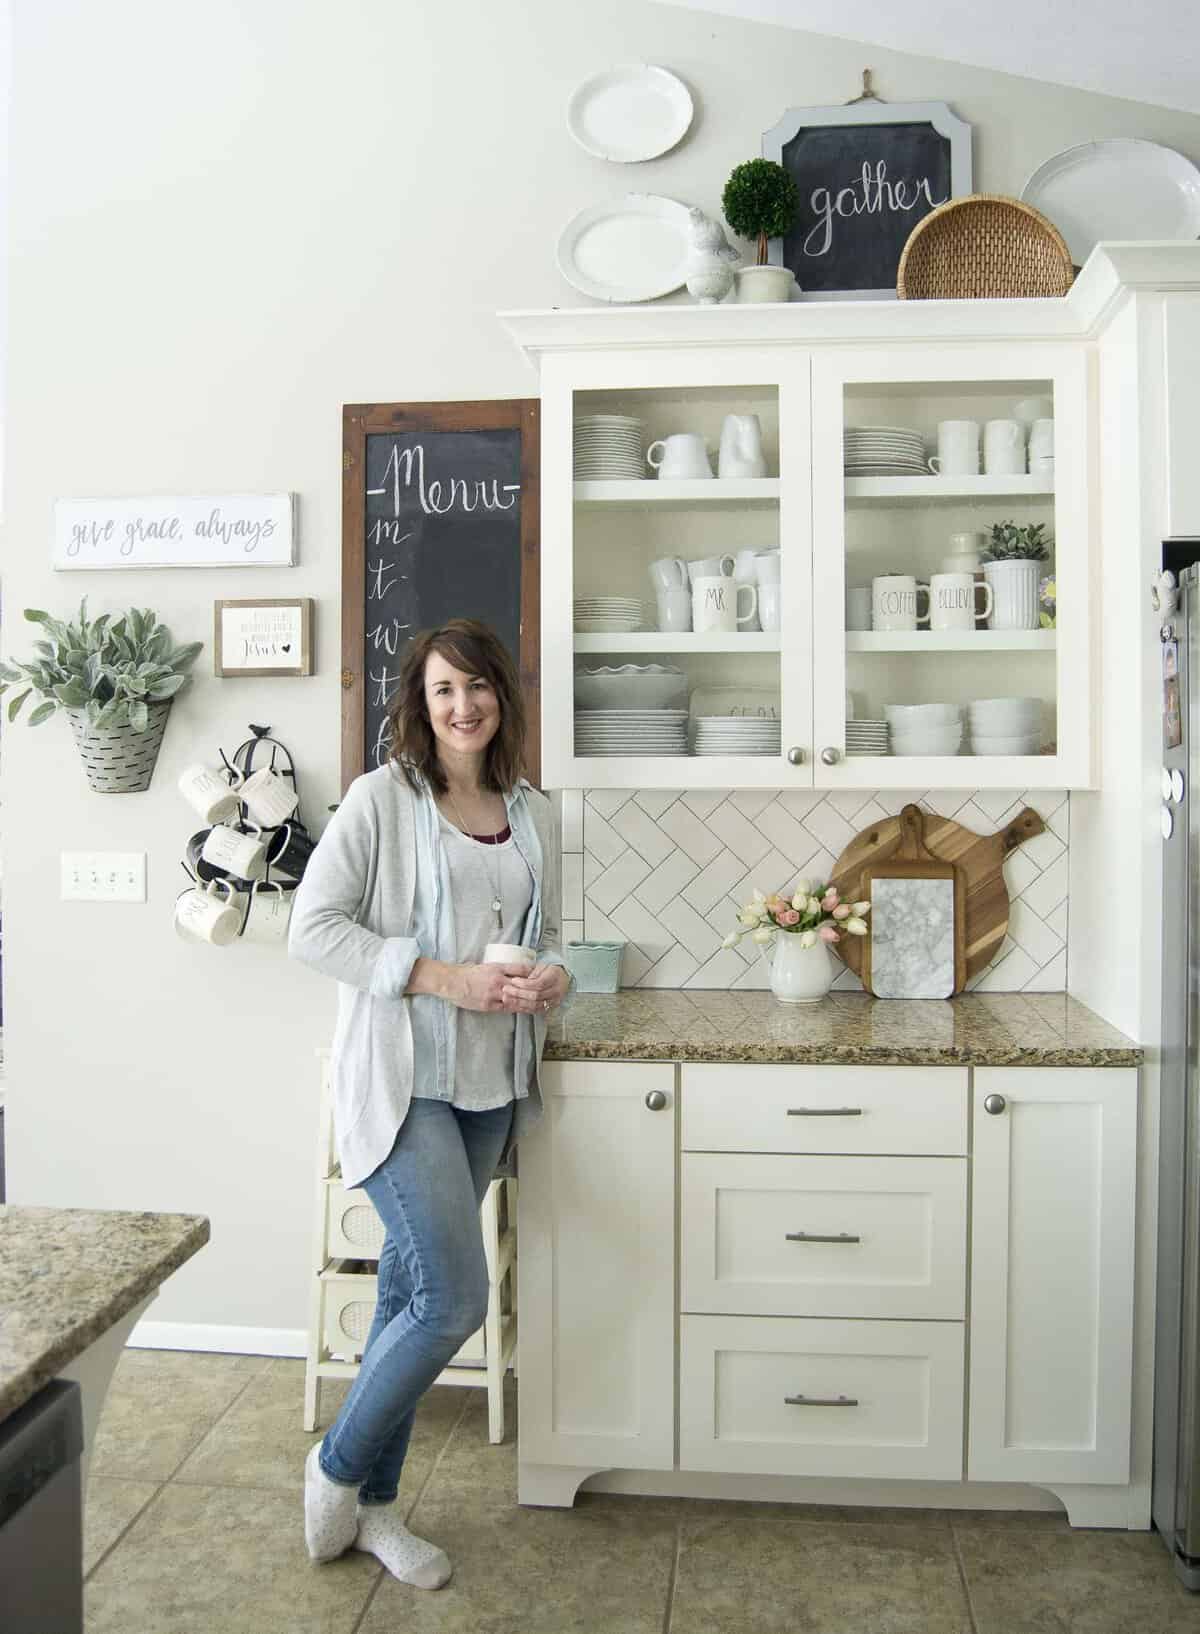 Are you looking for pretty and practical spring kitchen decor ideas? Here are some sure fire ways to beautify your spring kitchen decor and bring some sunshine and life back into your kitchen. This is perfect for the modern farmhouse kitchen lover who enjoys a bit of character in her home.